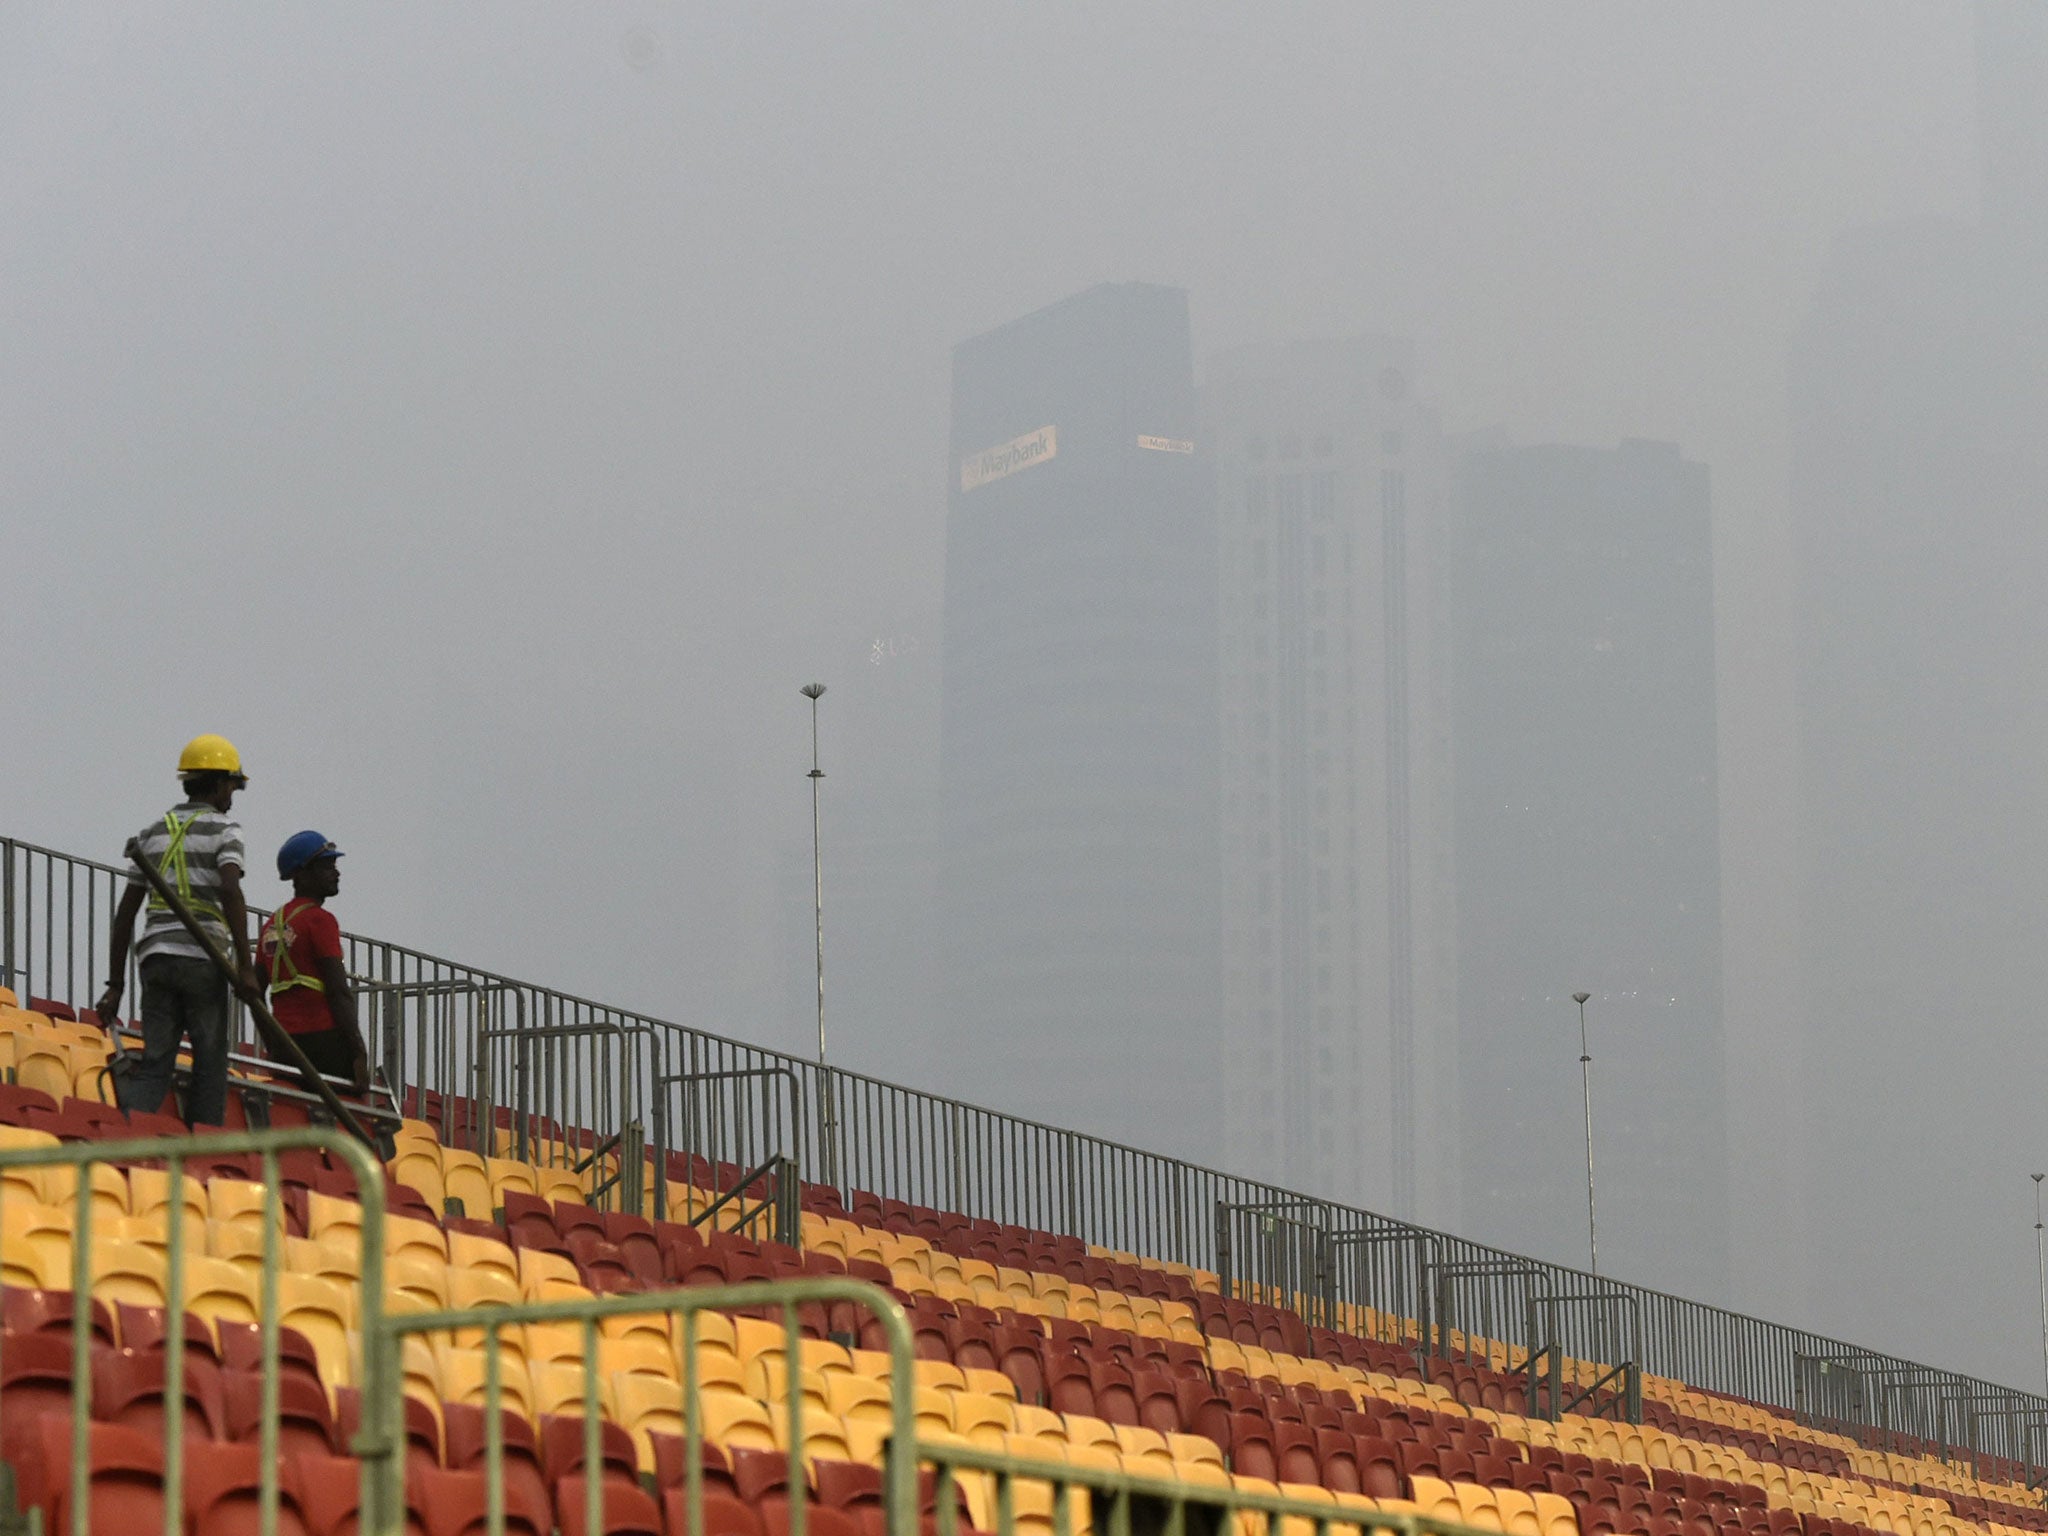 The fans' seating area is surrounded by thick smog